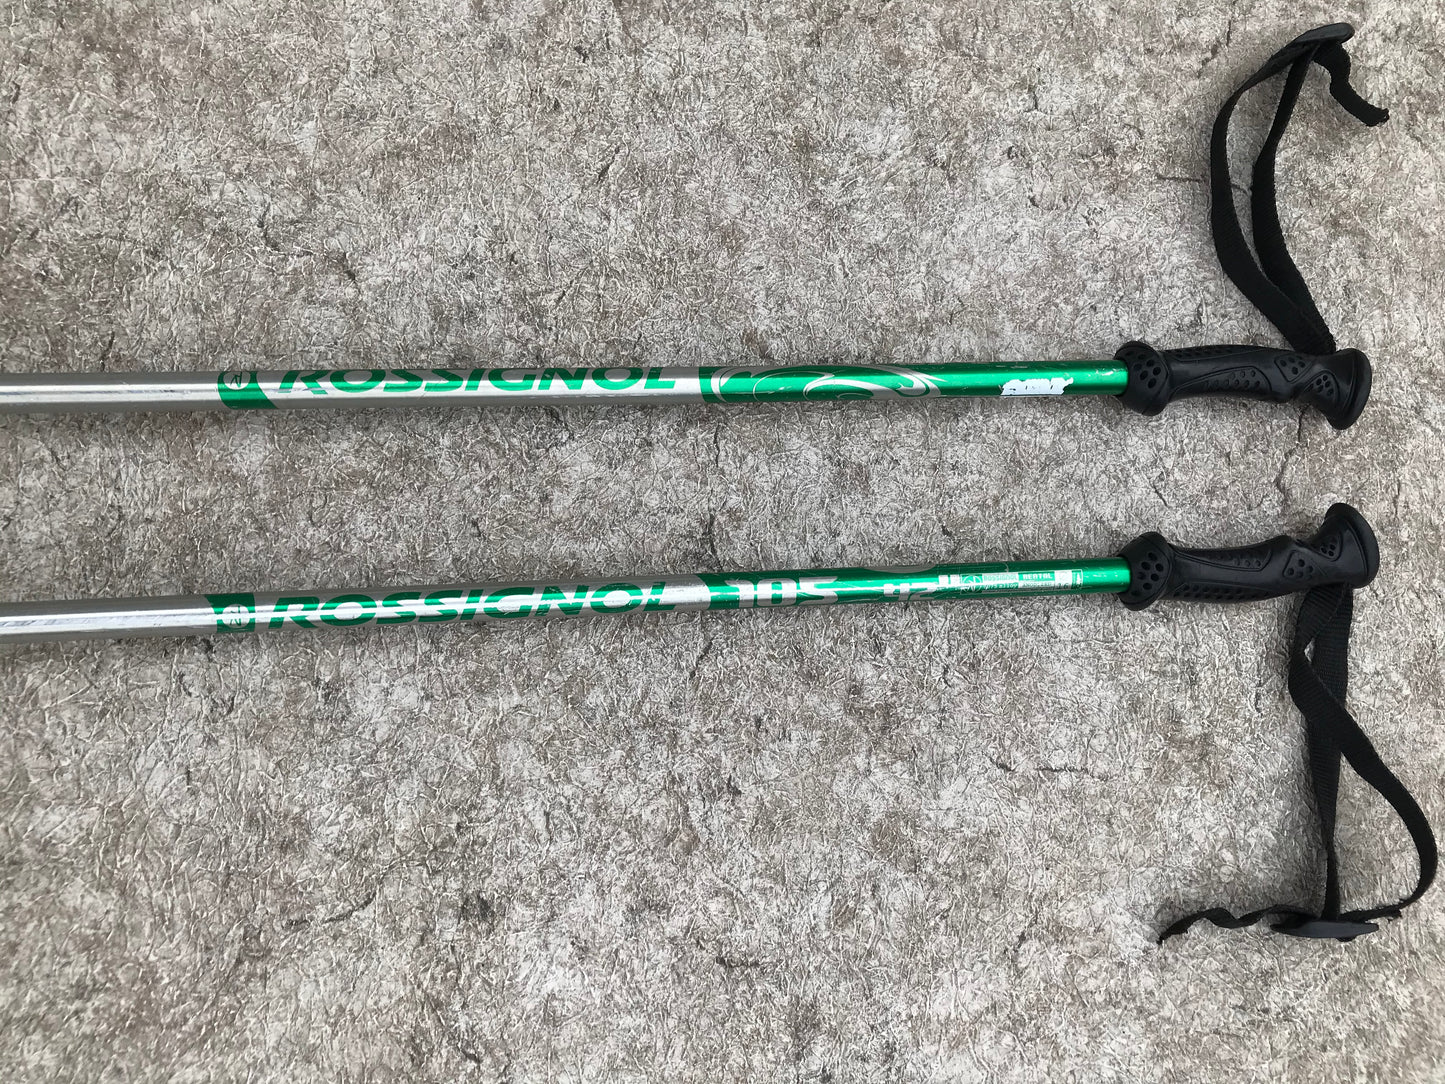 Ski Poles Child Size 41 inch Rossignol Chrome and Green With Rubber Grips